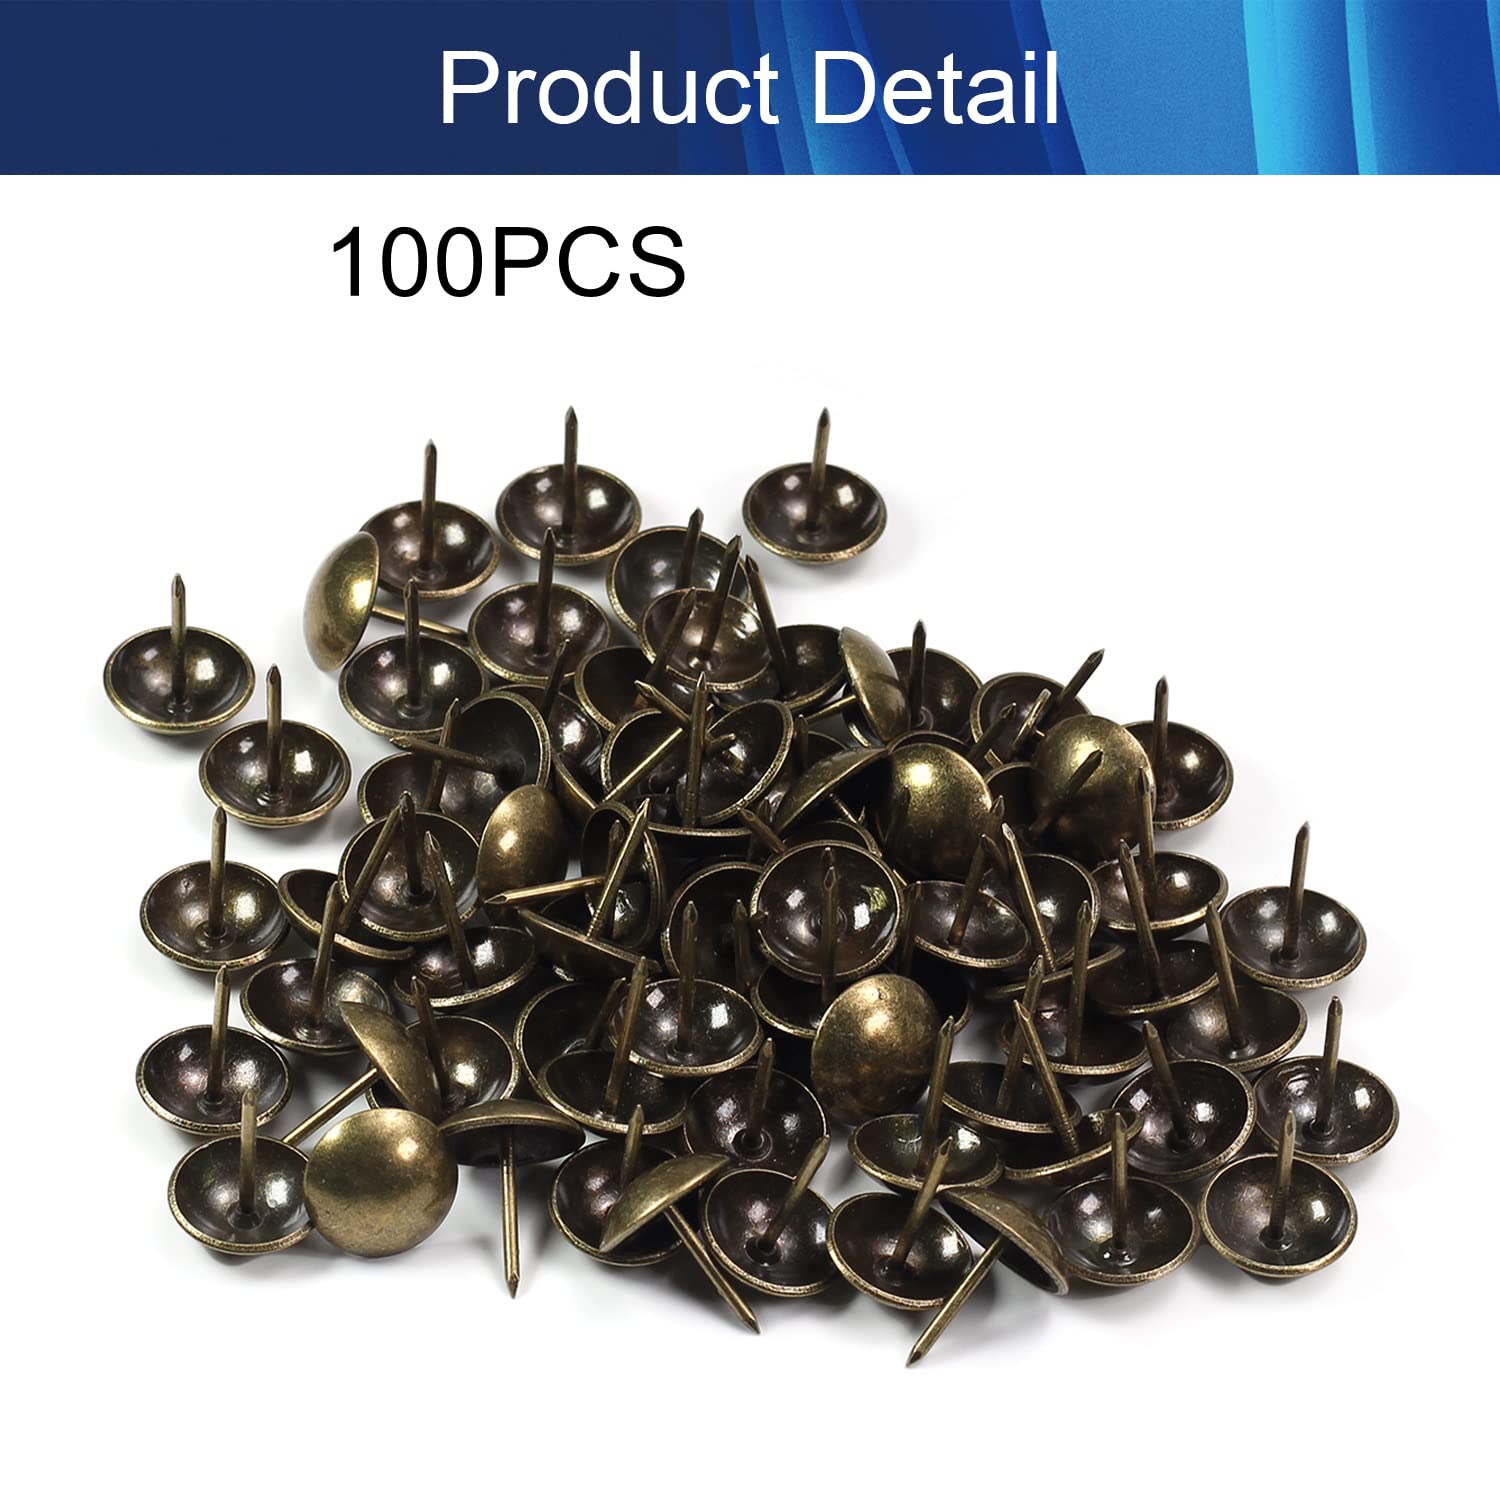 Juvielich 100Pcs Upholstery Round Thumb Tacks 19mm/0.75" Head Dia Iron electroplated Vintage Style Metal 23mm/0.91" Height for Furniture Decoration Chair Cork Board Sofa Headboards Bronze